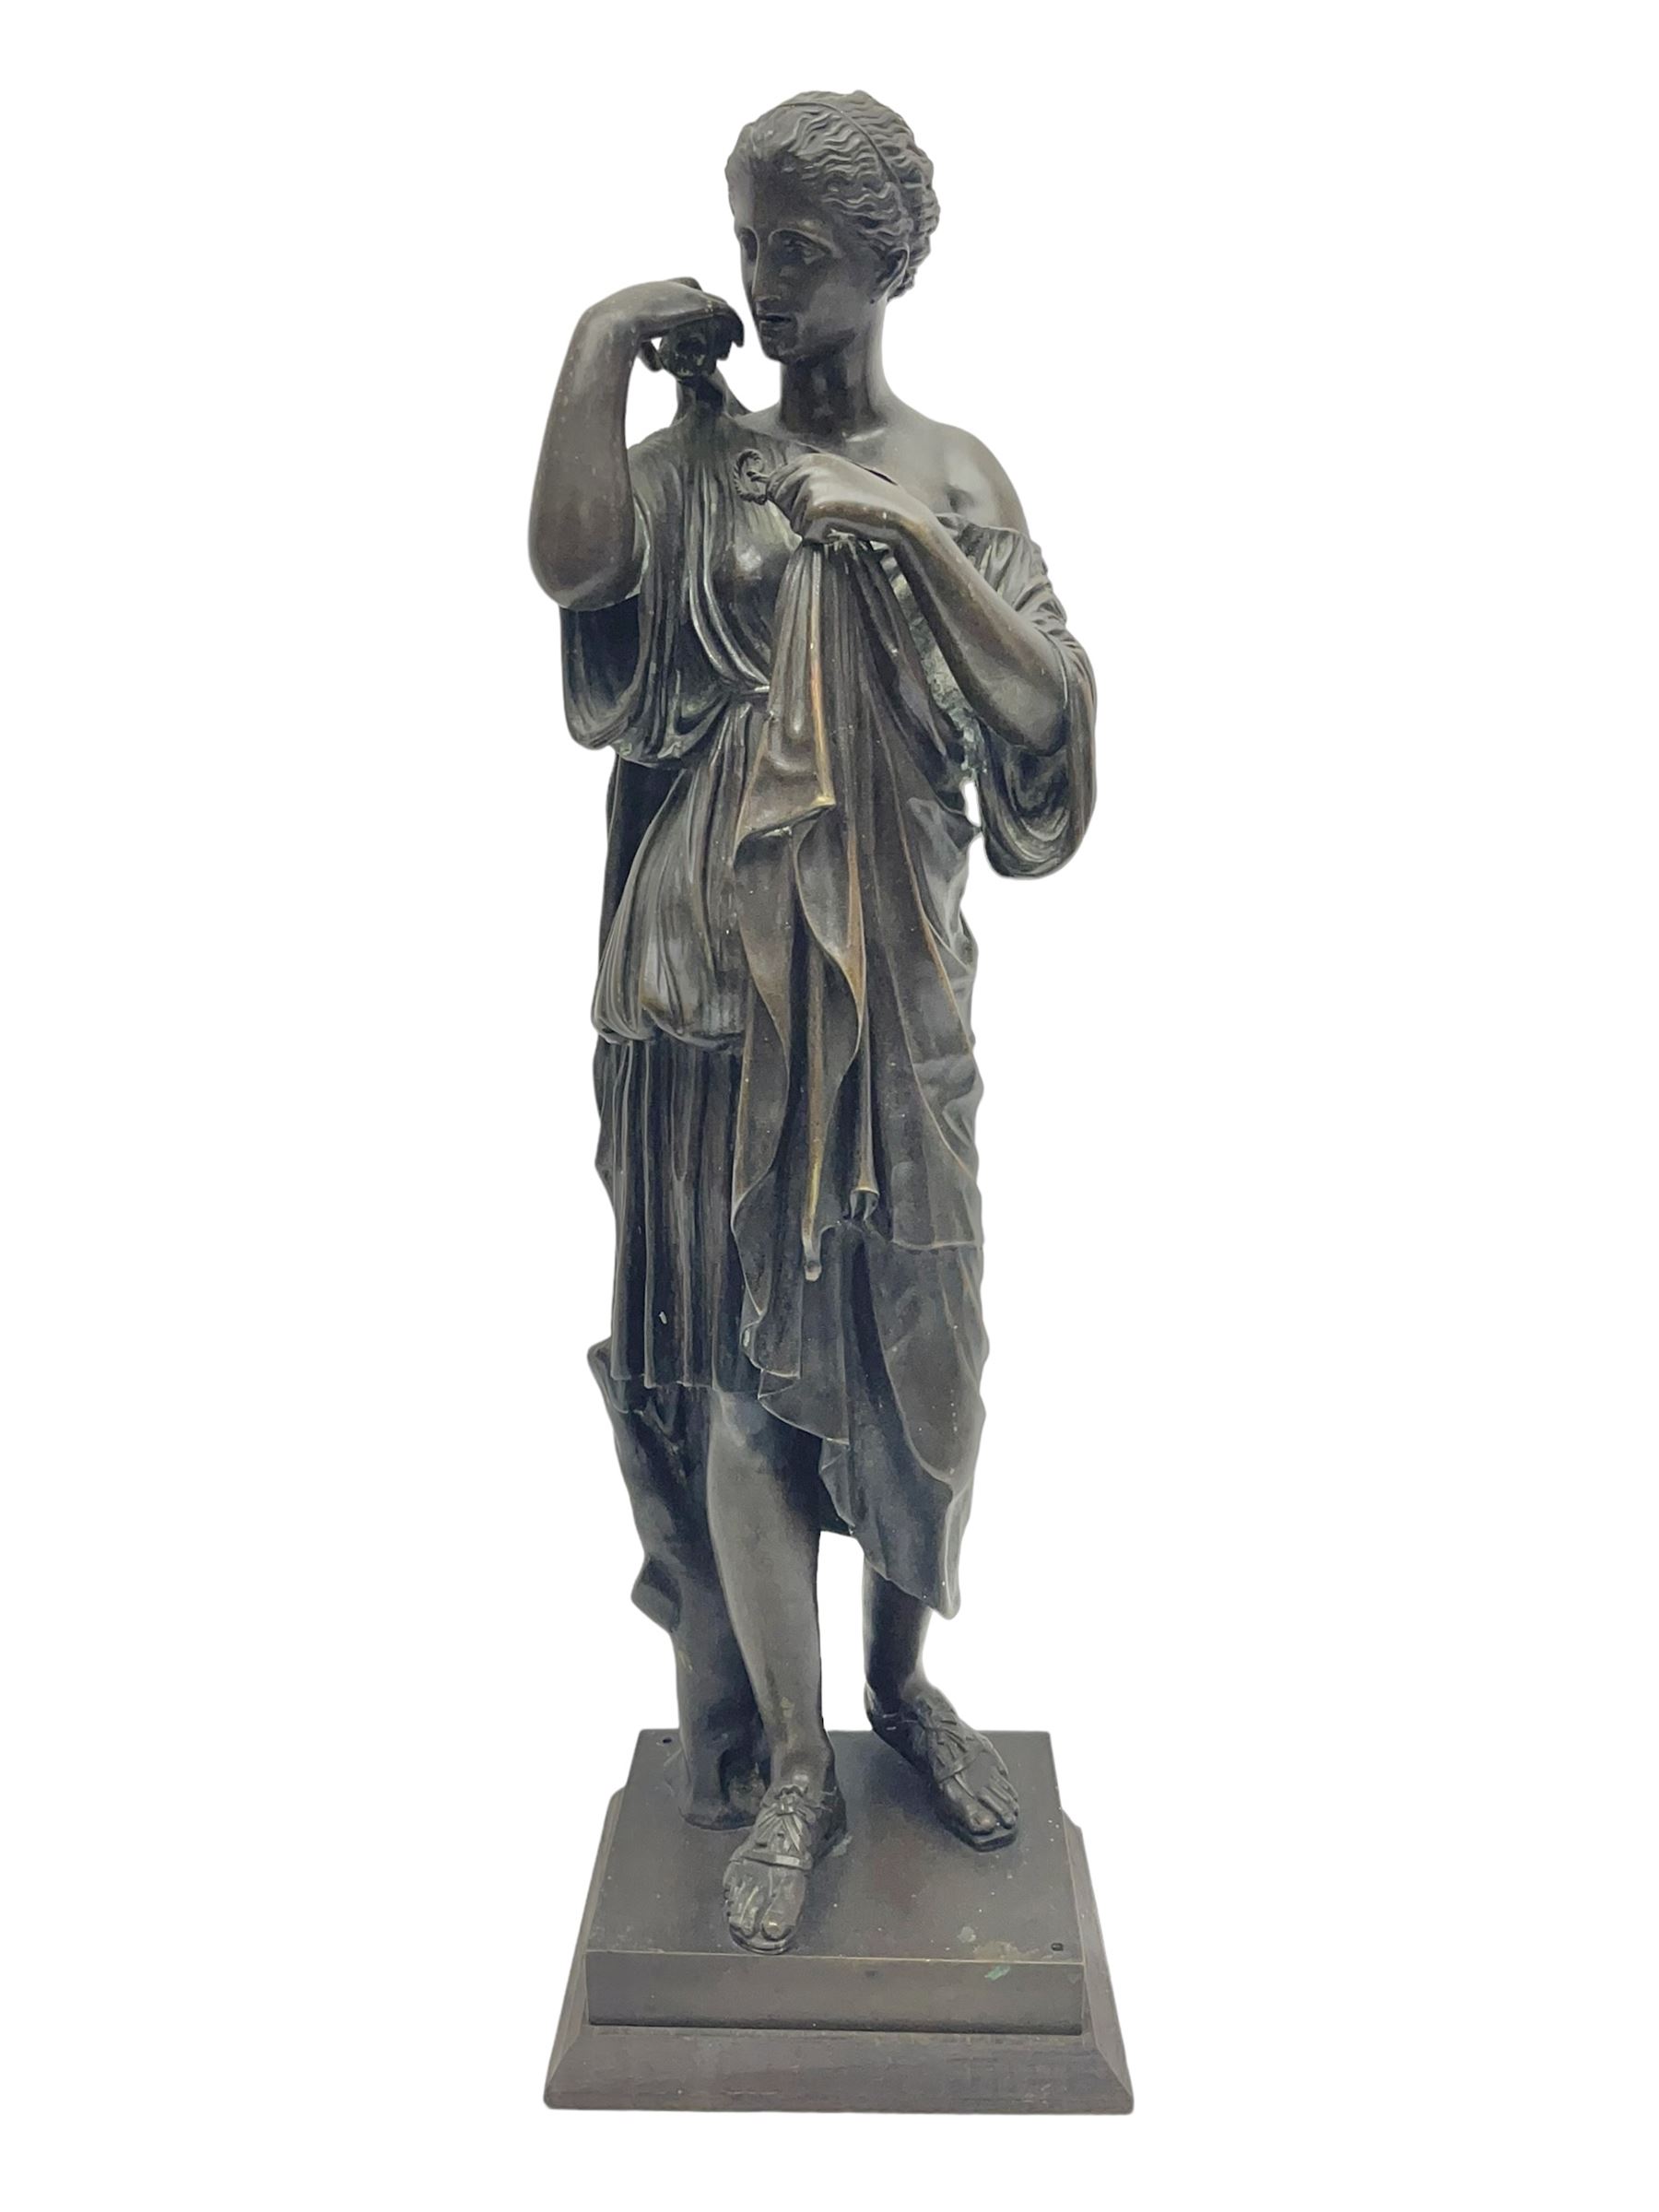 Bronzed figure of a woman in neoclassical dress